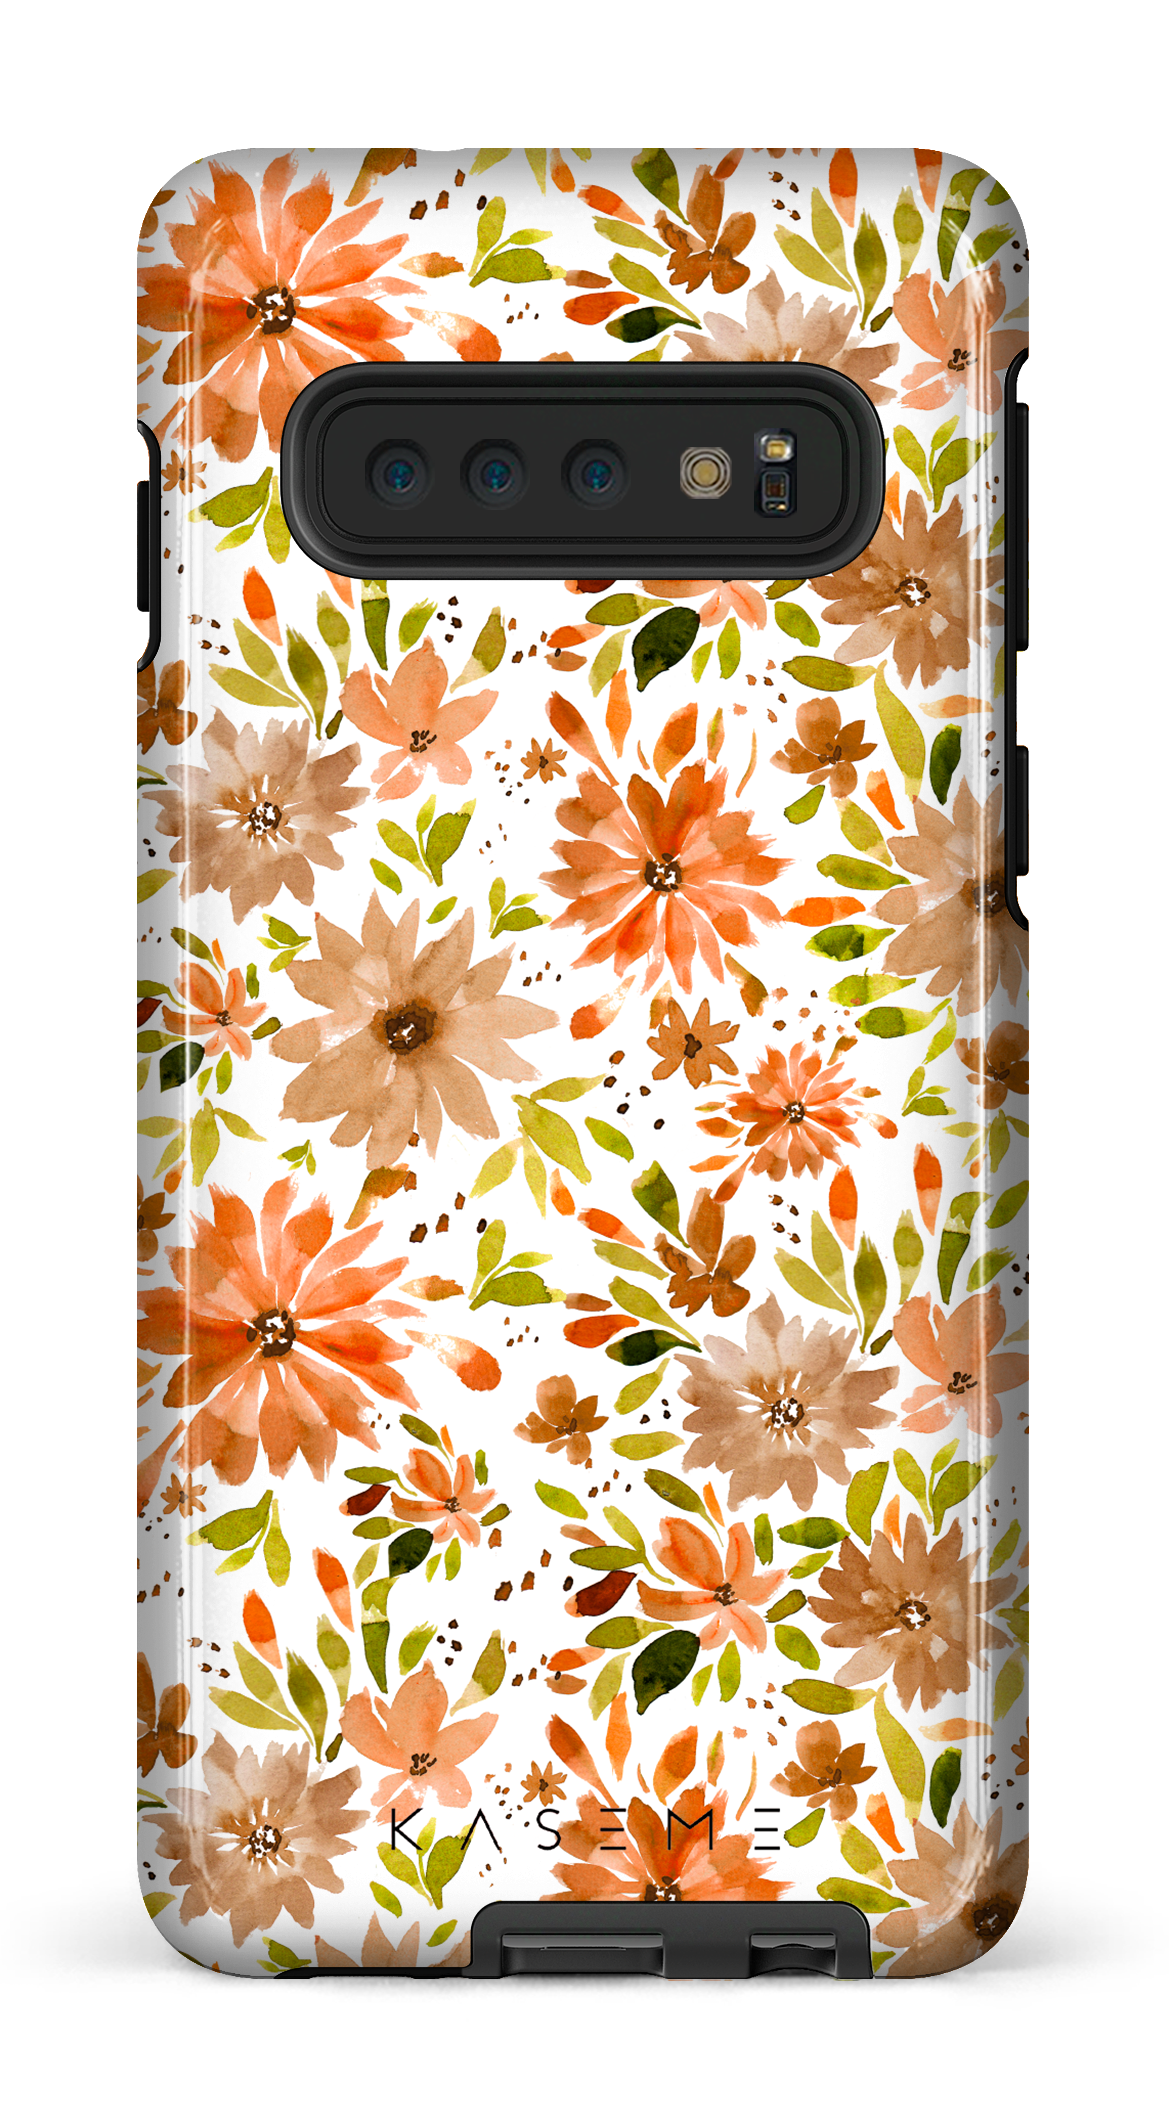 Golden Harvest blooms by ﻿ Zohra designs - Galaxy S10